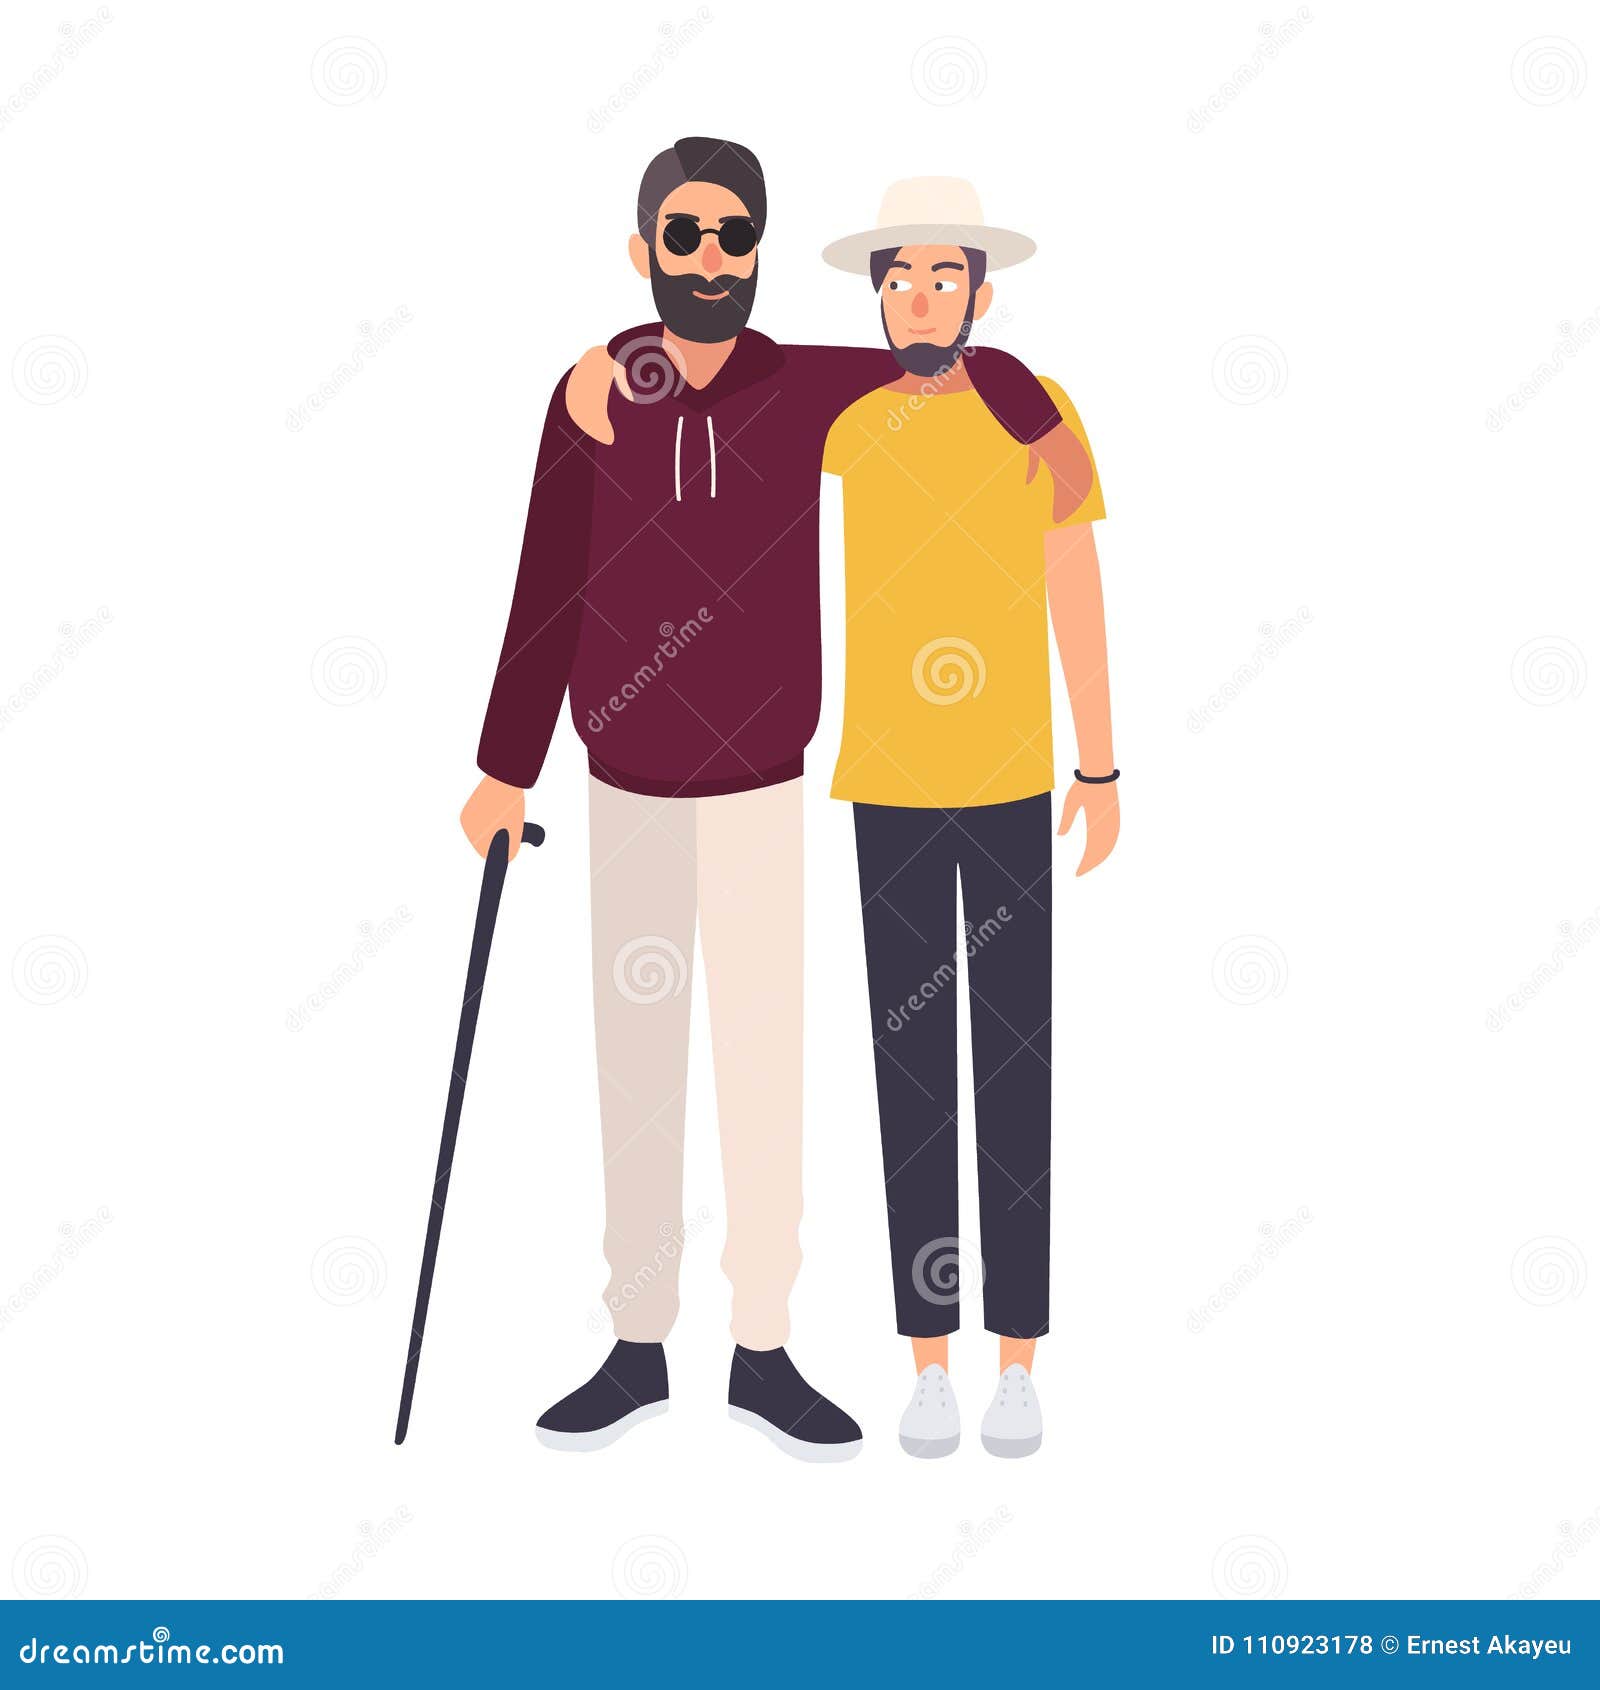 bearded blind man with sunglasses and cane standing and embracing with his friend. male character with blindness, visual